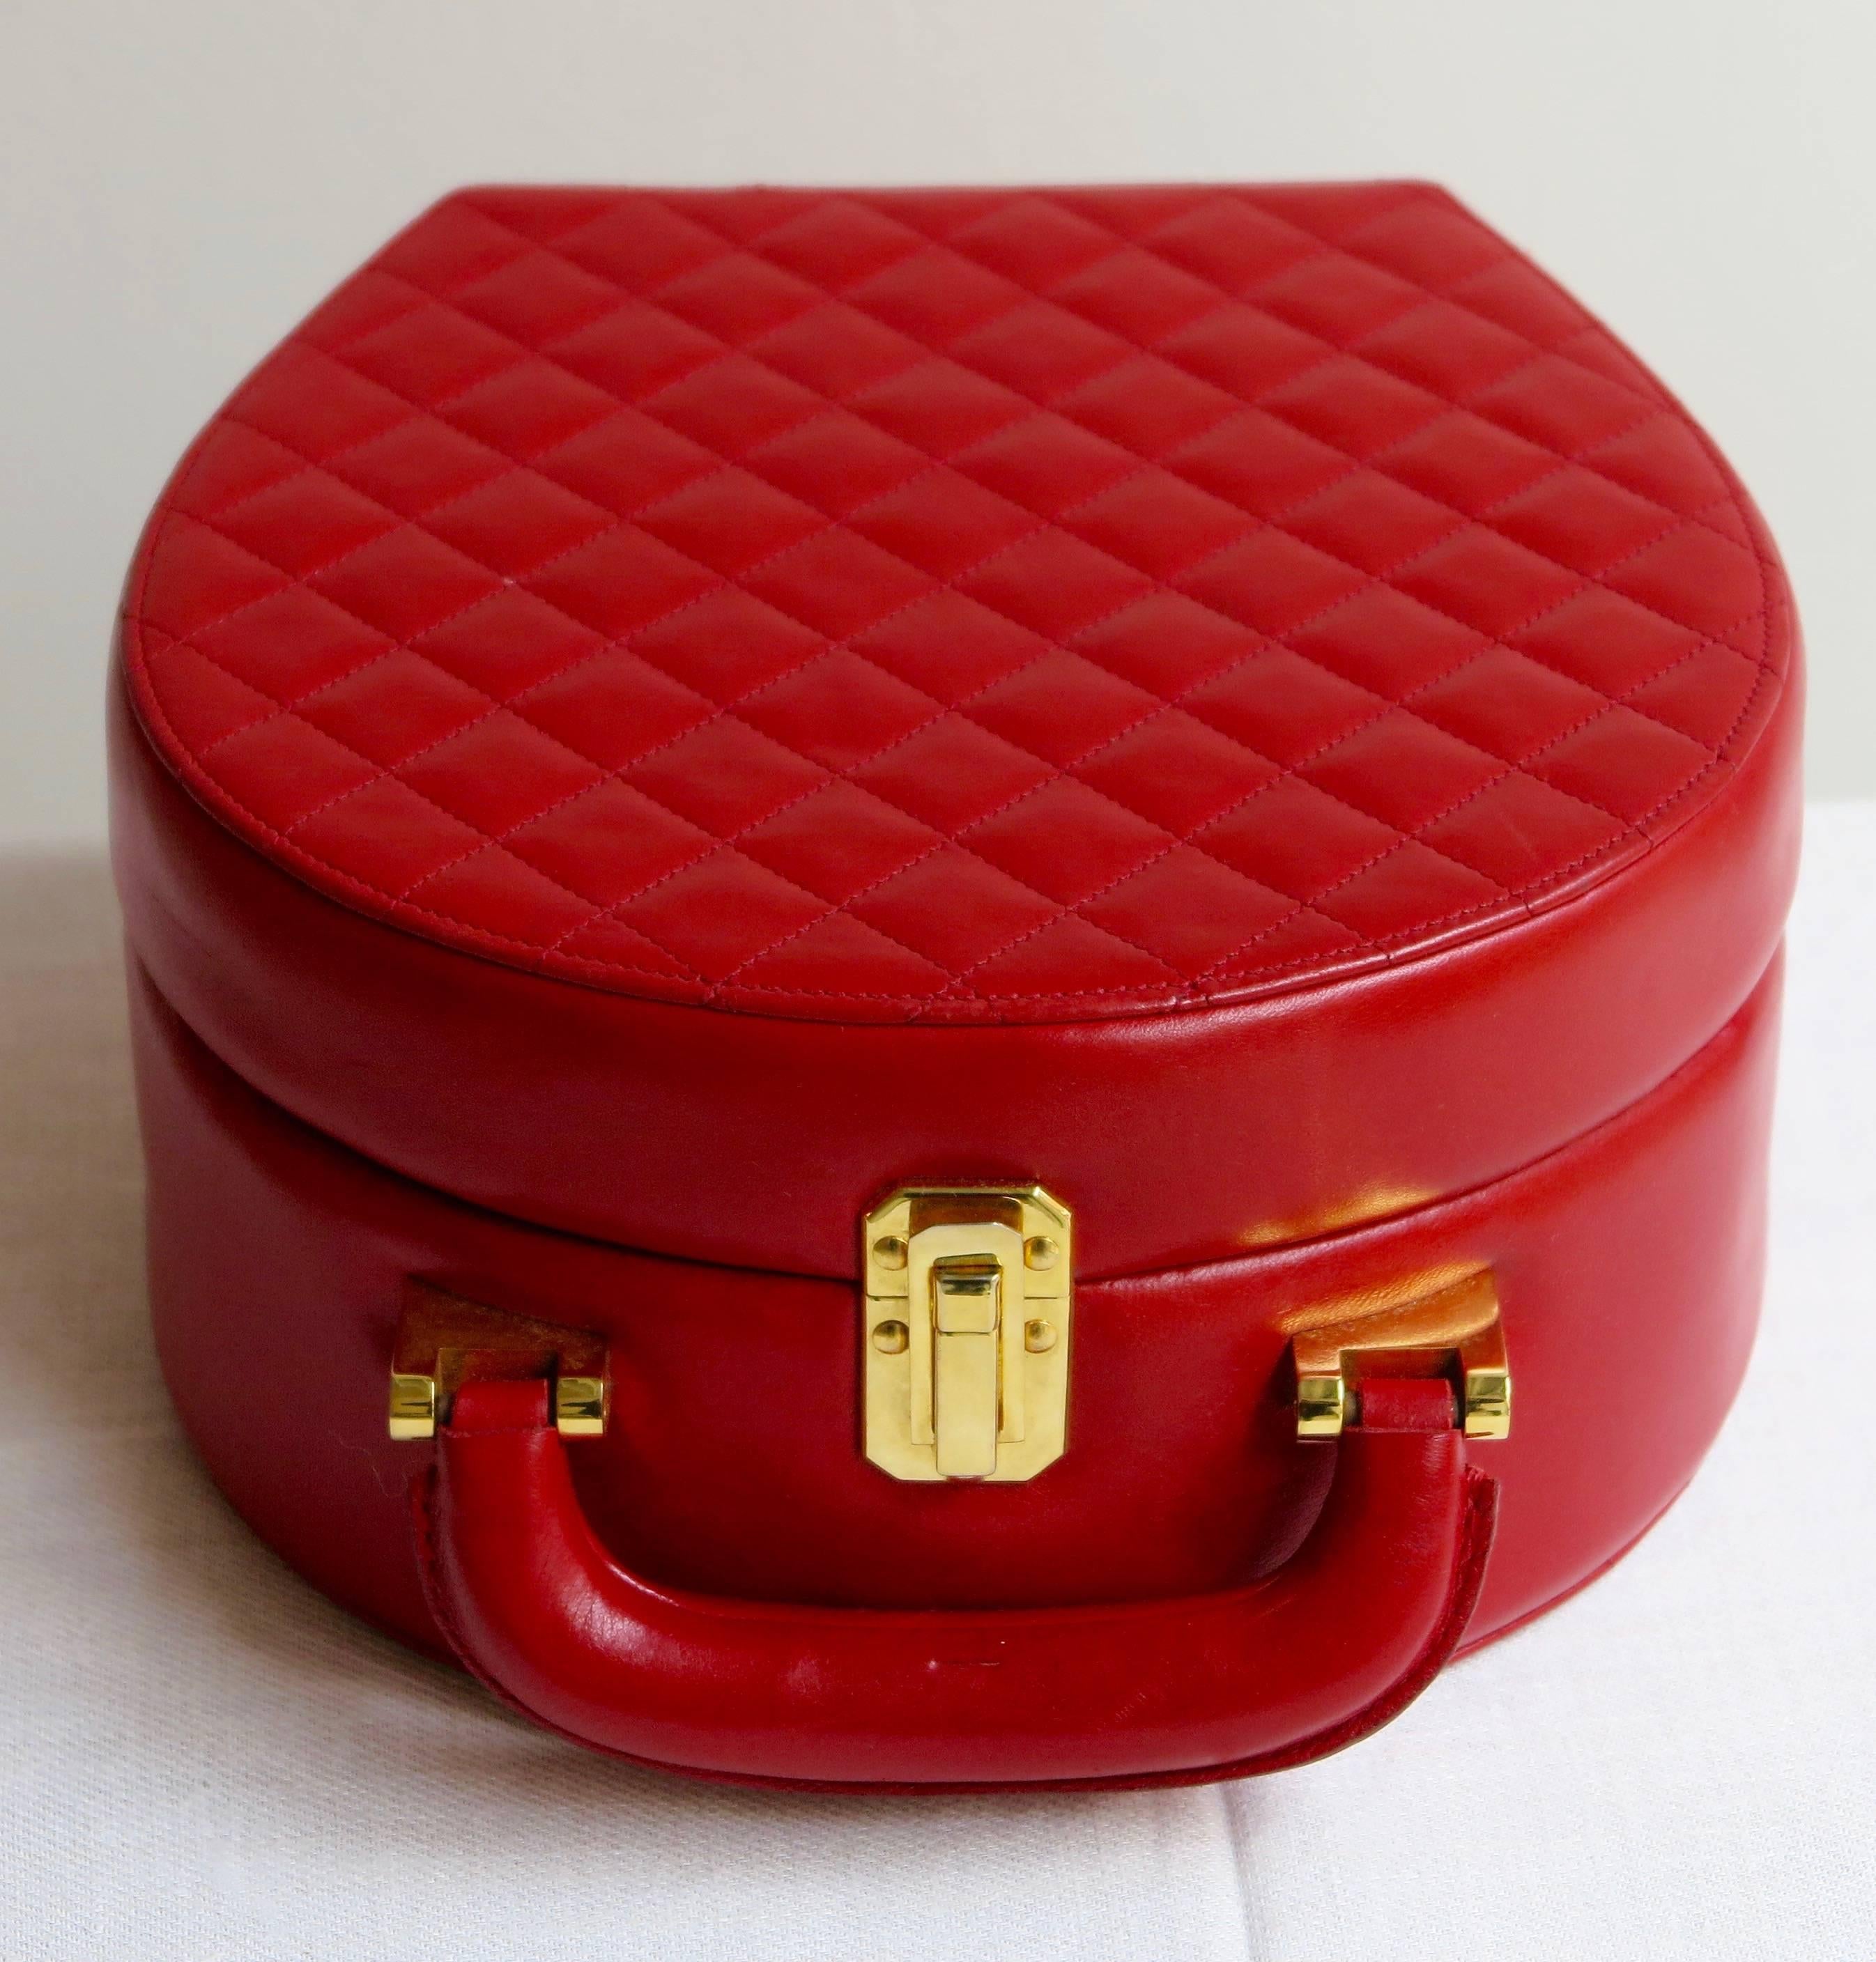 Rare chanel lipstick red vanity or bag in quilted leather, circa early 1990. 
Inside: embossed CC and big mirror.
Signature: Chanel, made in France.